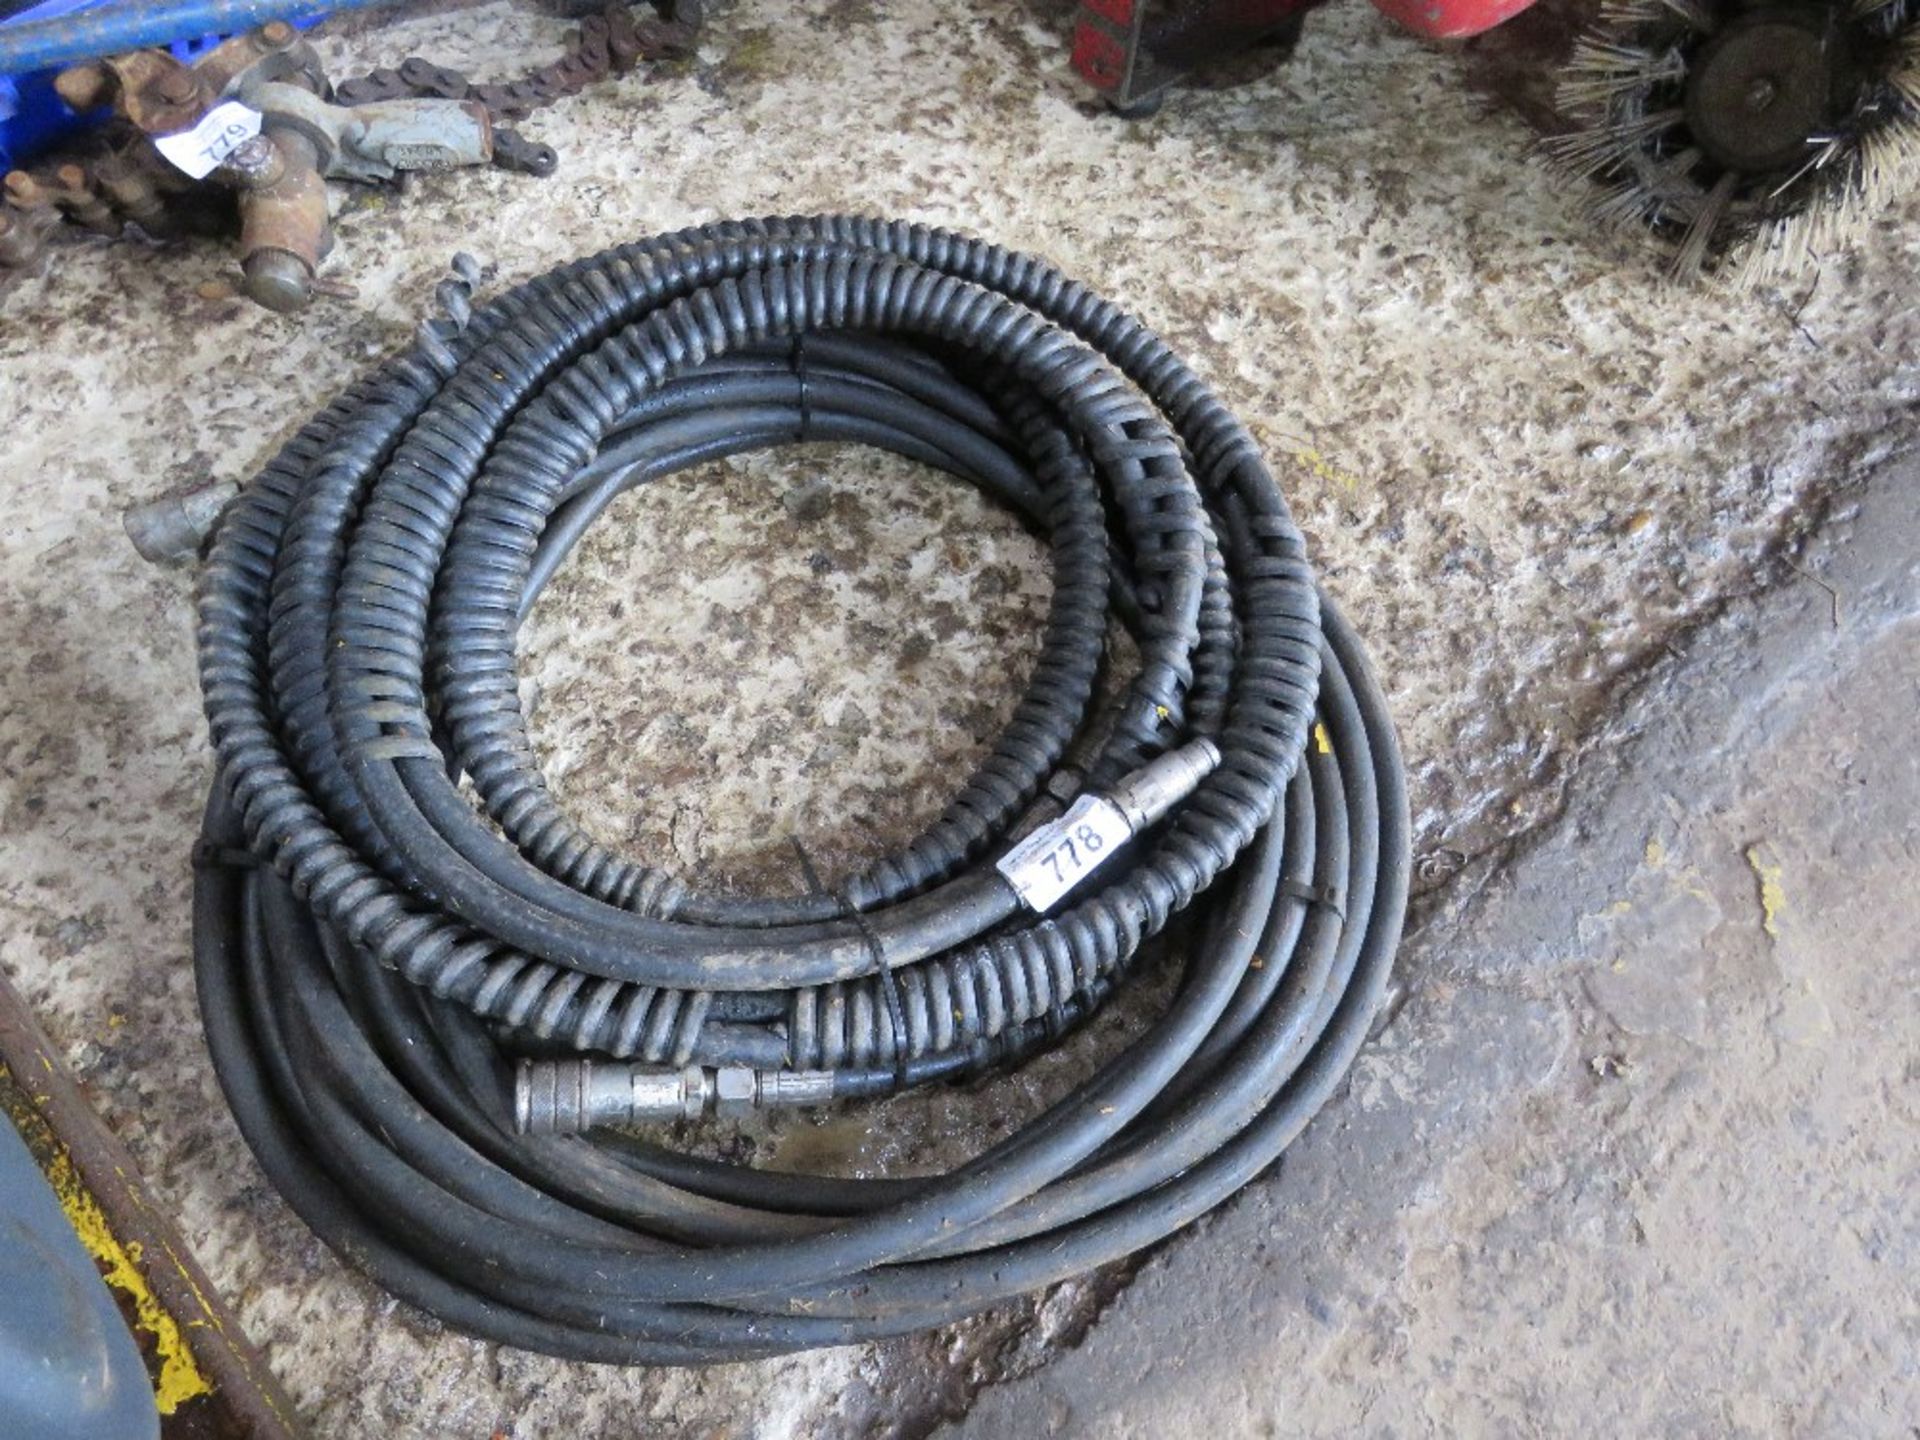 2 X SETS OF HYDRAULIC BREAKER PACK HOSES.